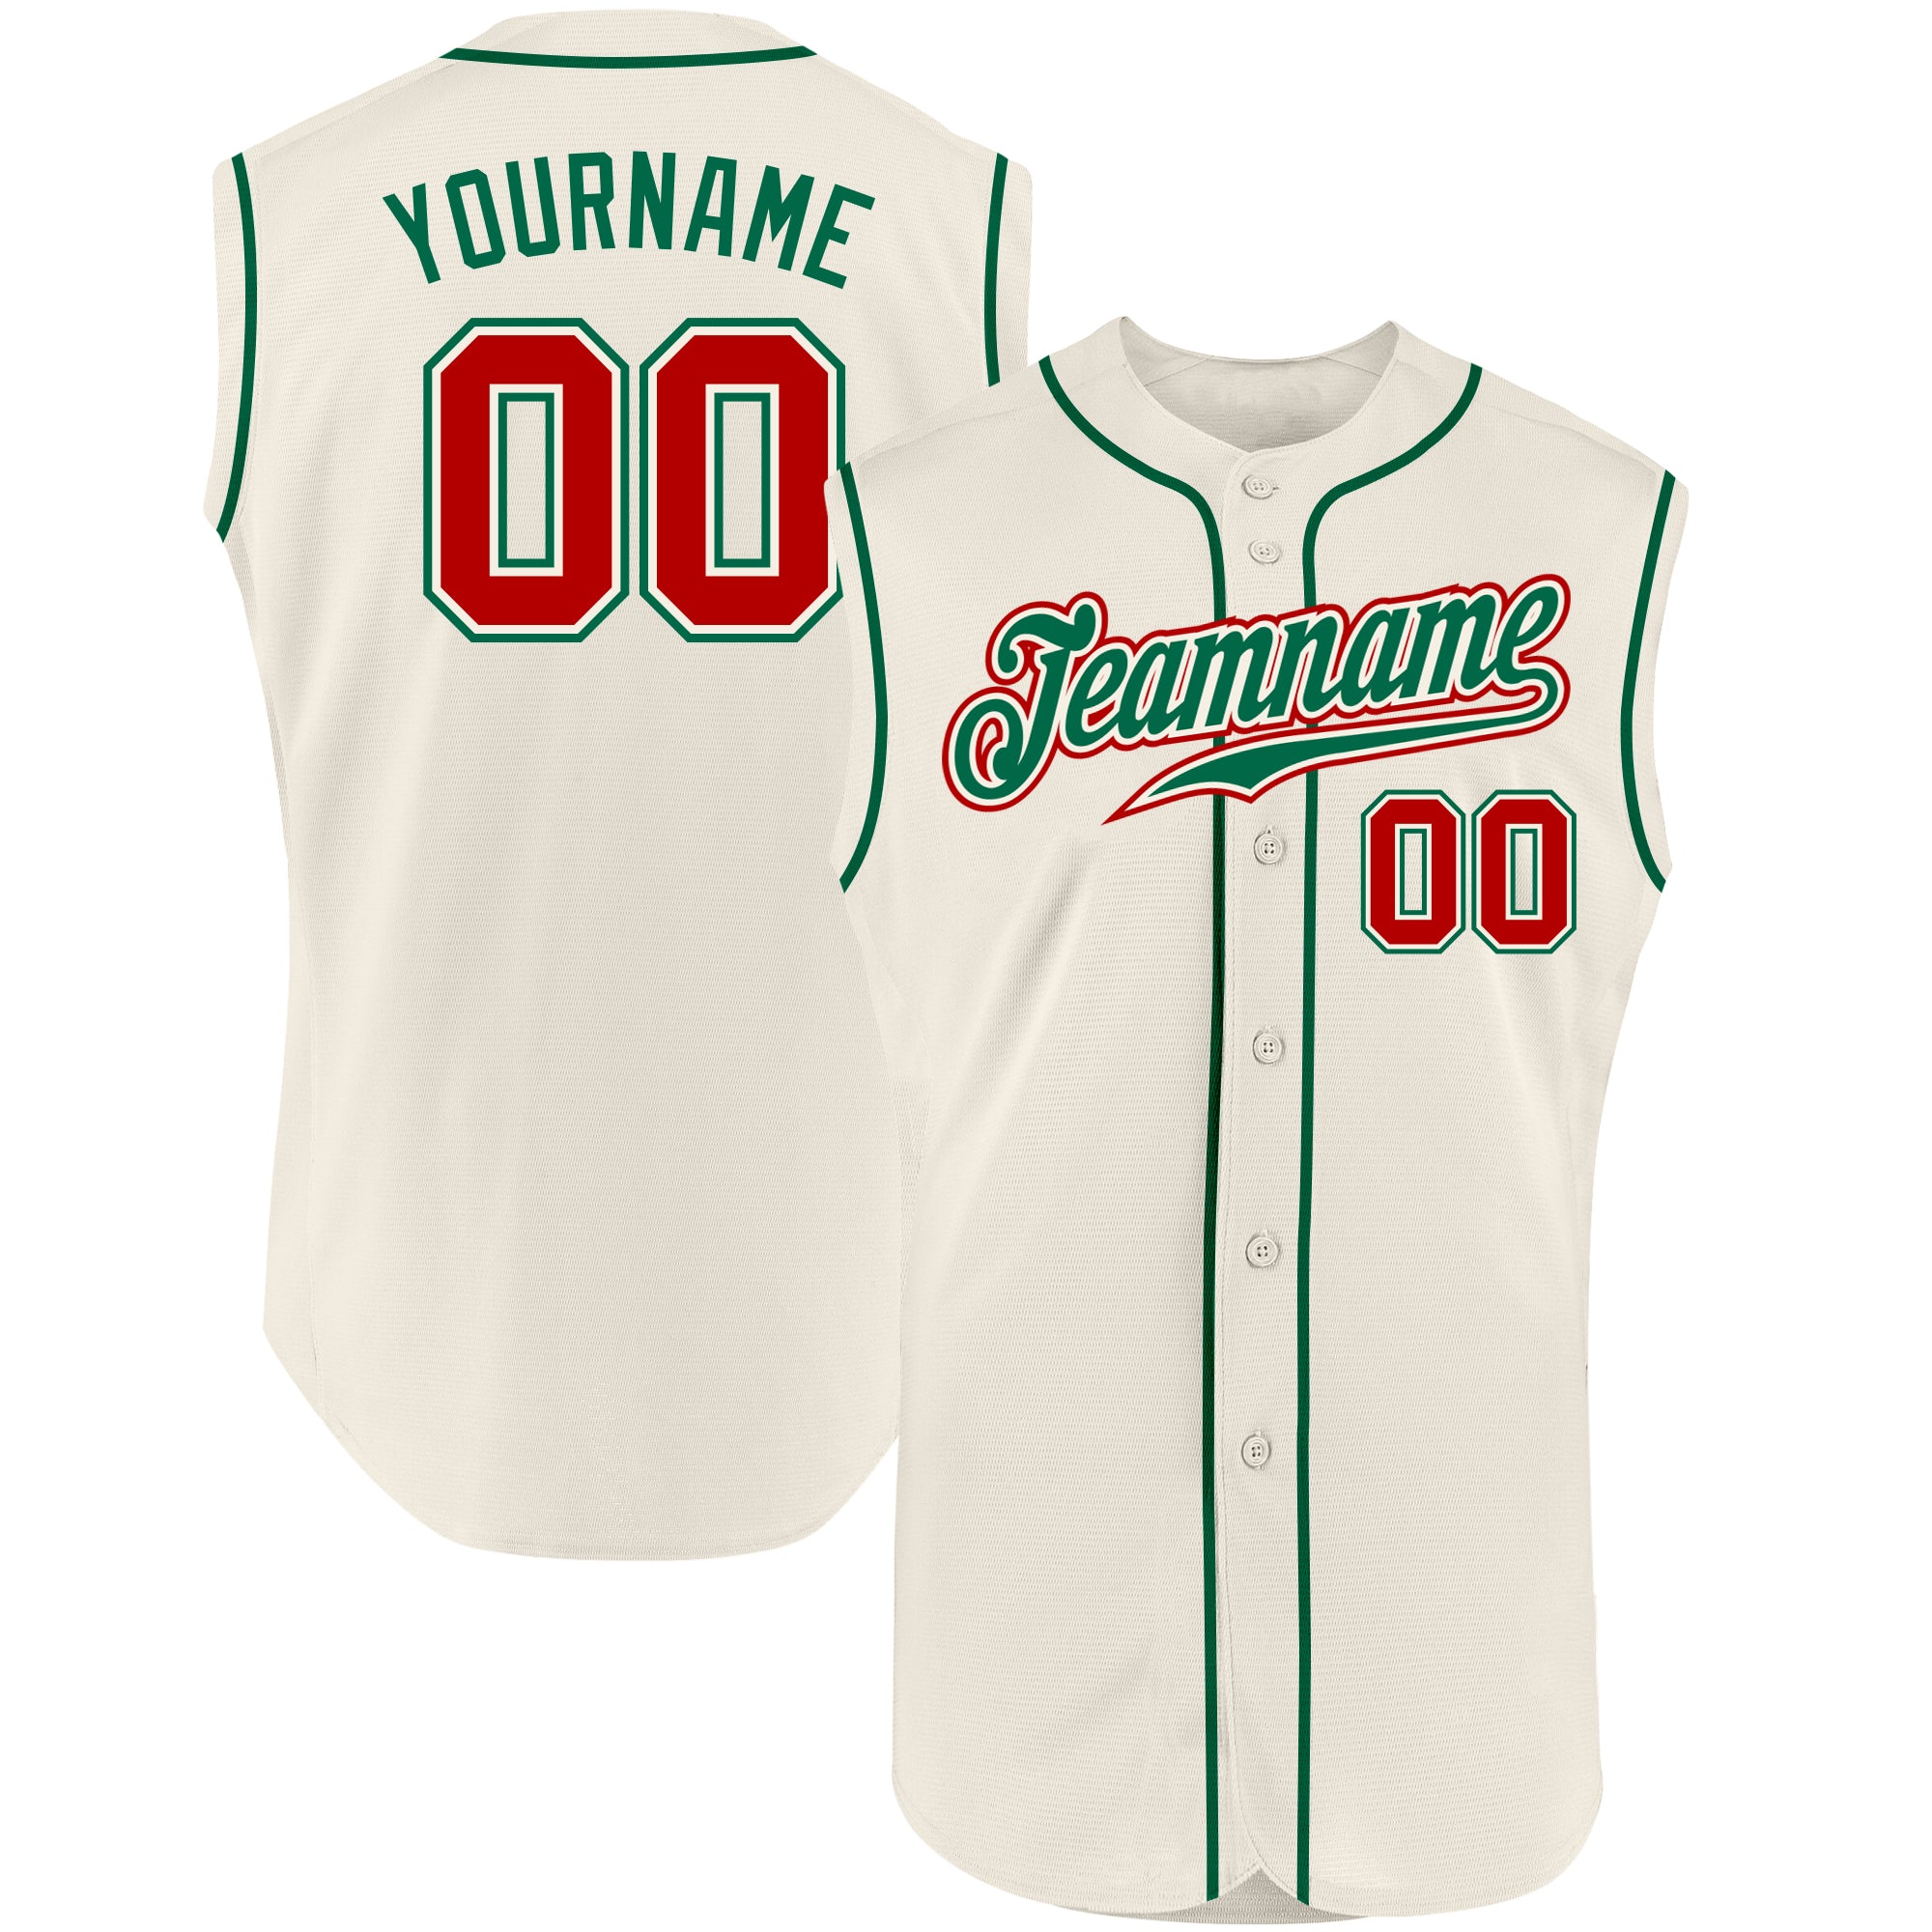 Custom Black Kelly Green-Red Authentic Two Tone Baseball Jersey Discount